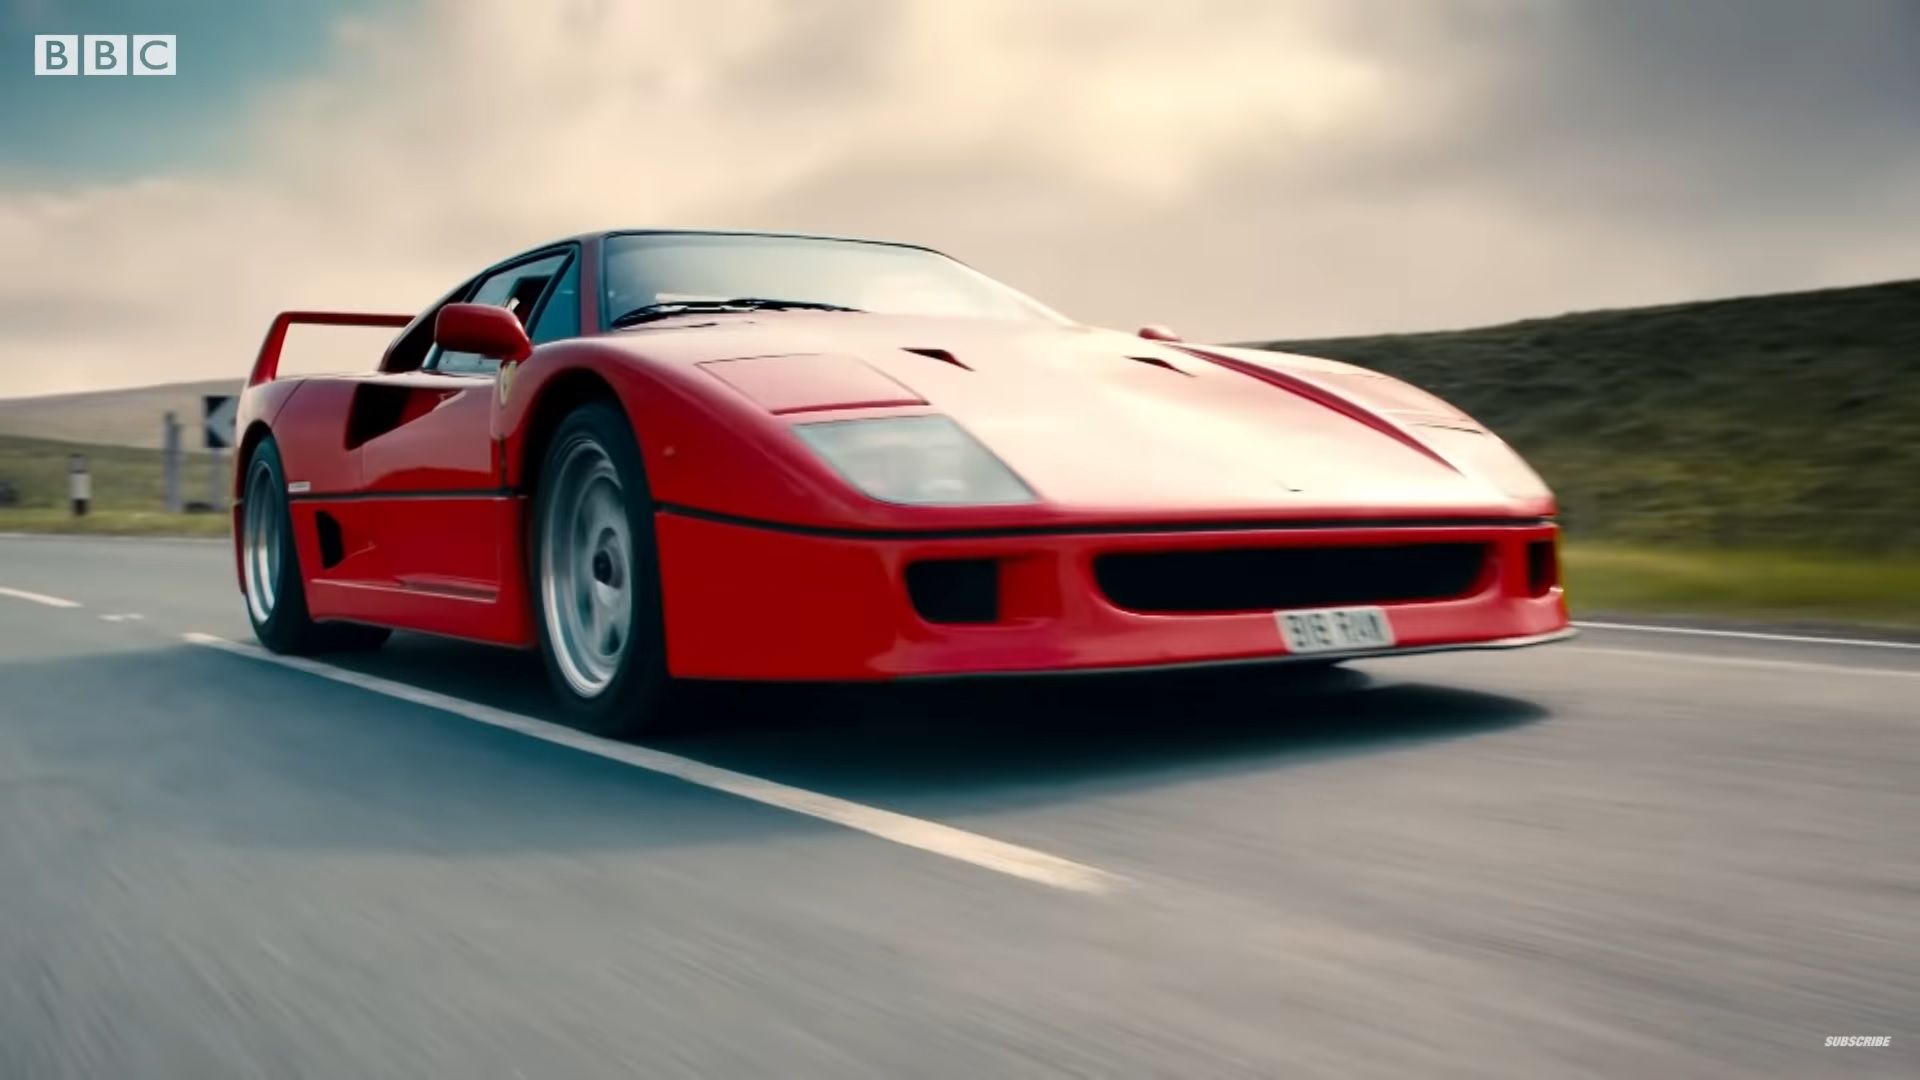 ballade Intim systematisk Top Gear, The Ferrari F40, and the Jaguar XJ220 - This Is Going to Be Epic